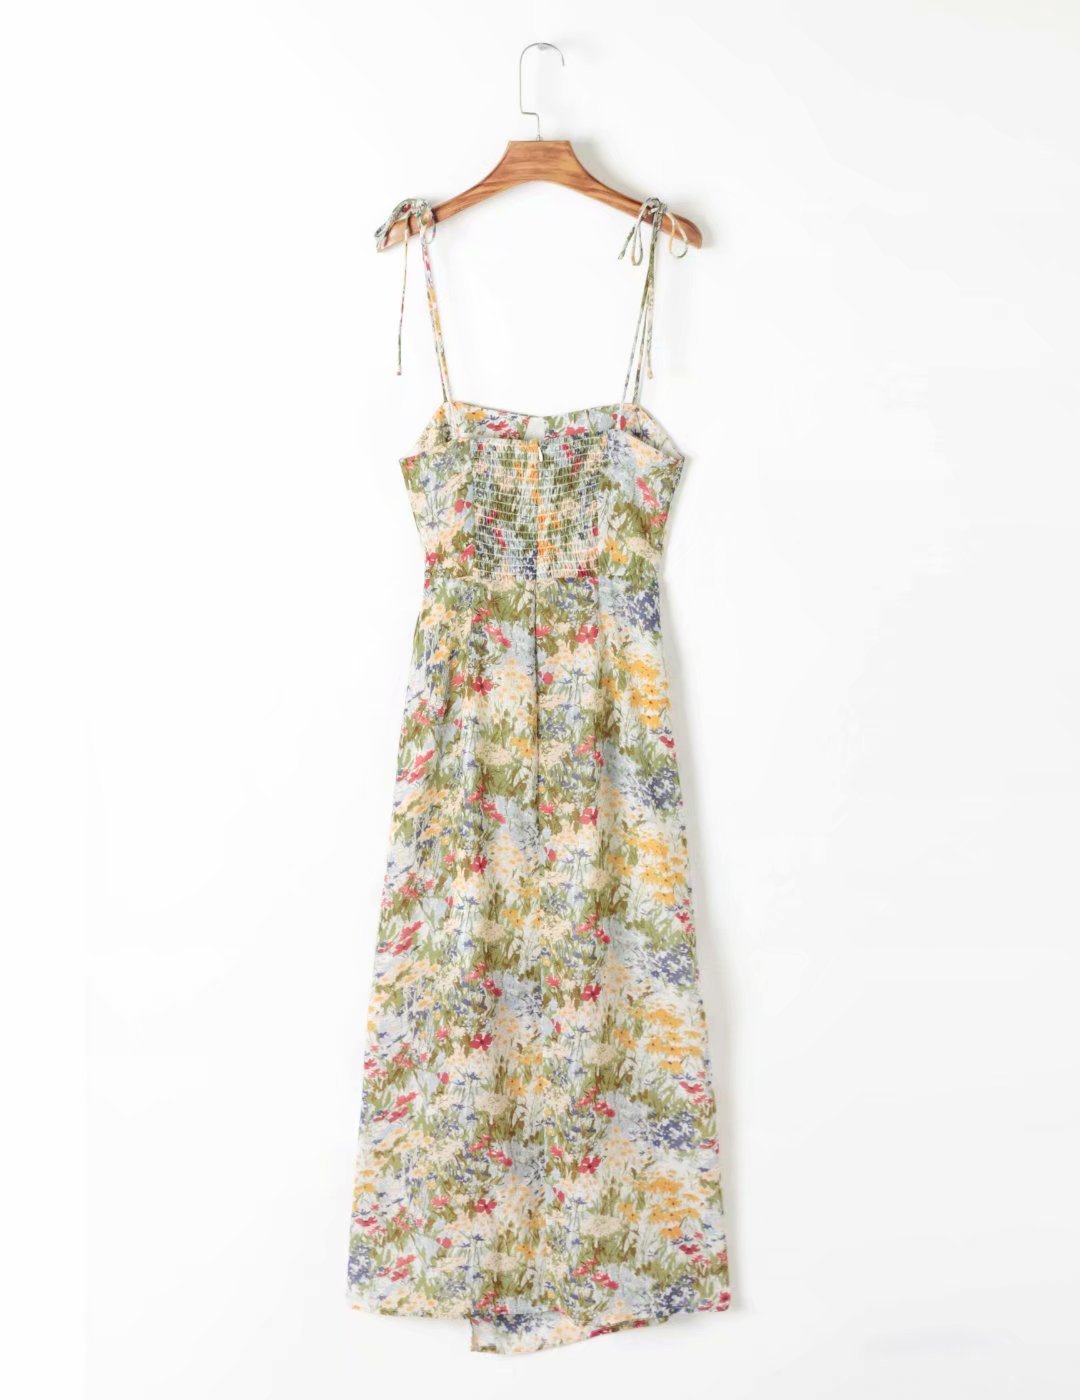 Smile Says It All Floral Tie Front Maxi Dress